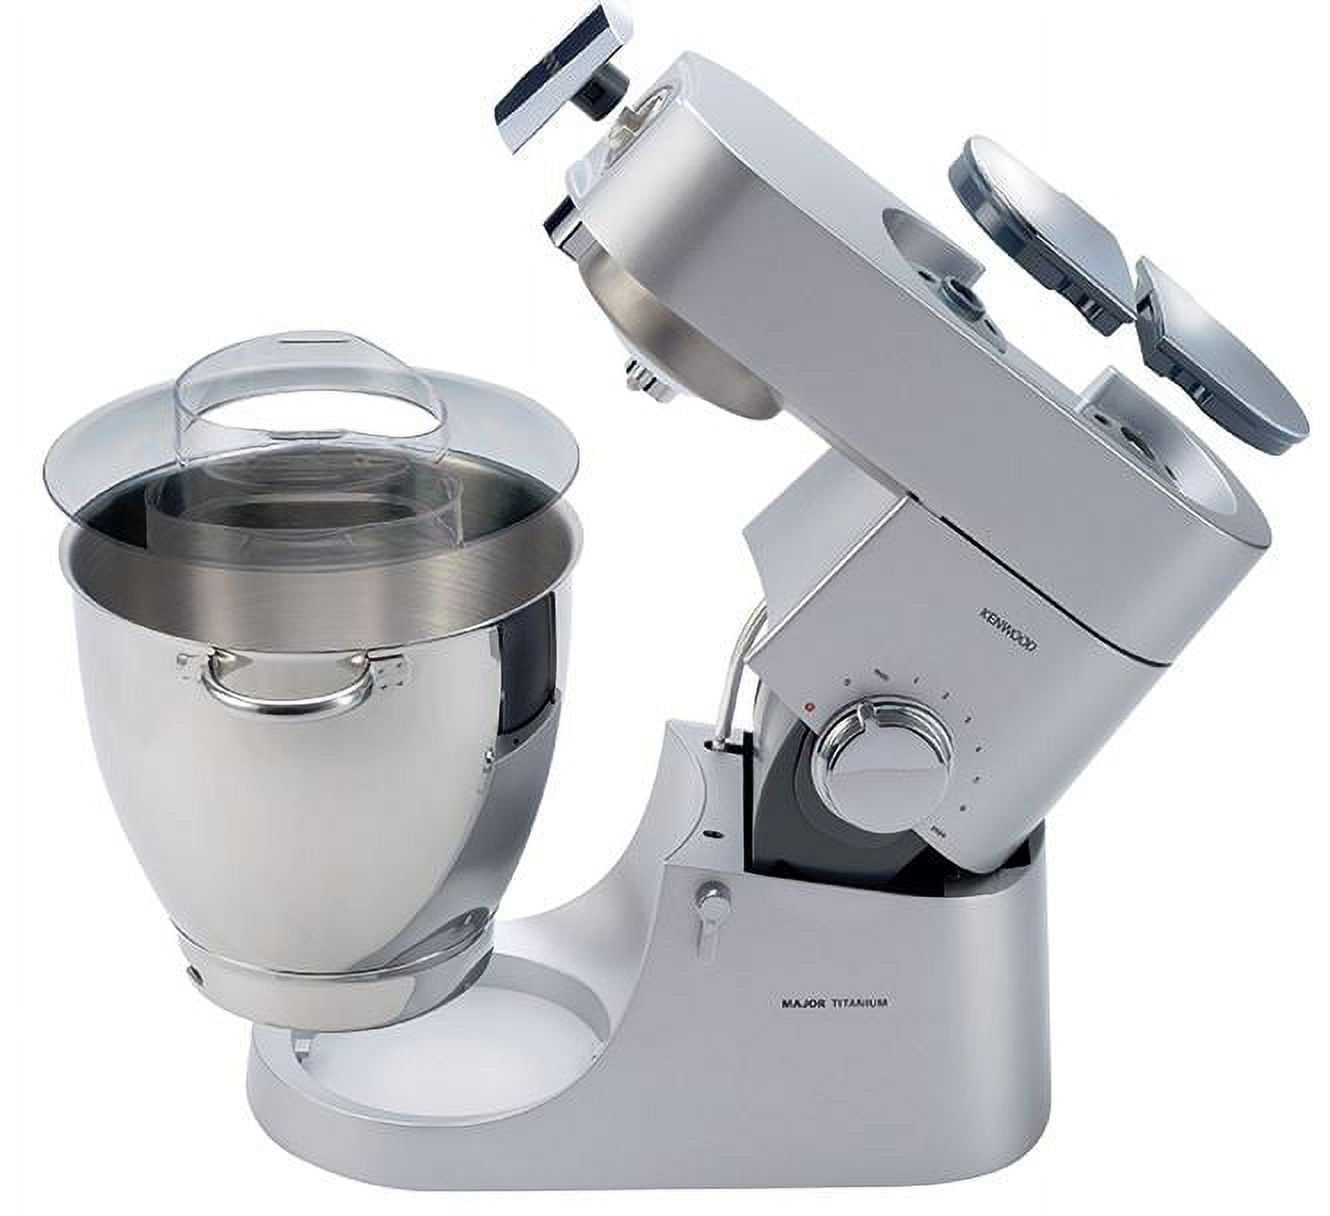 Kenwood Chef Titanium Kitchen Machine, Stainless Steel - 5 qt - Kitchen  Mixer - 800W Motor & Electronic Variable Speed Control - Includes